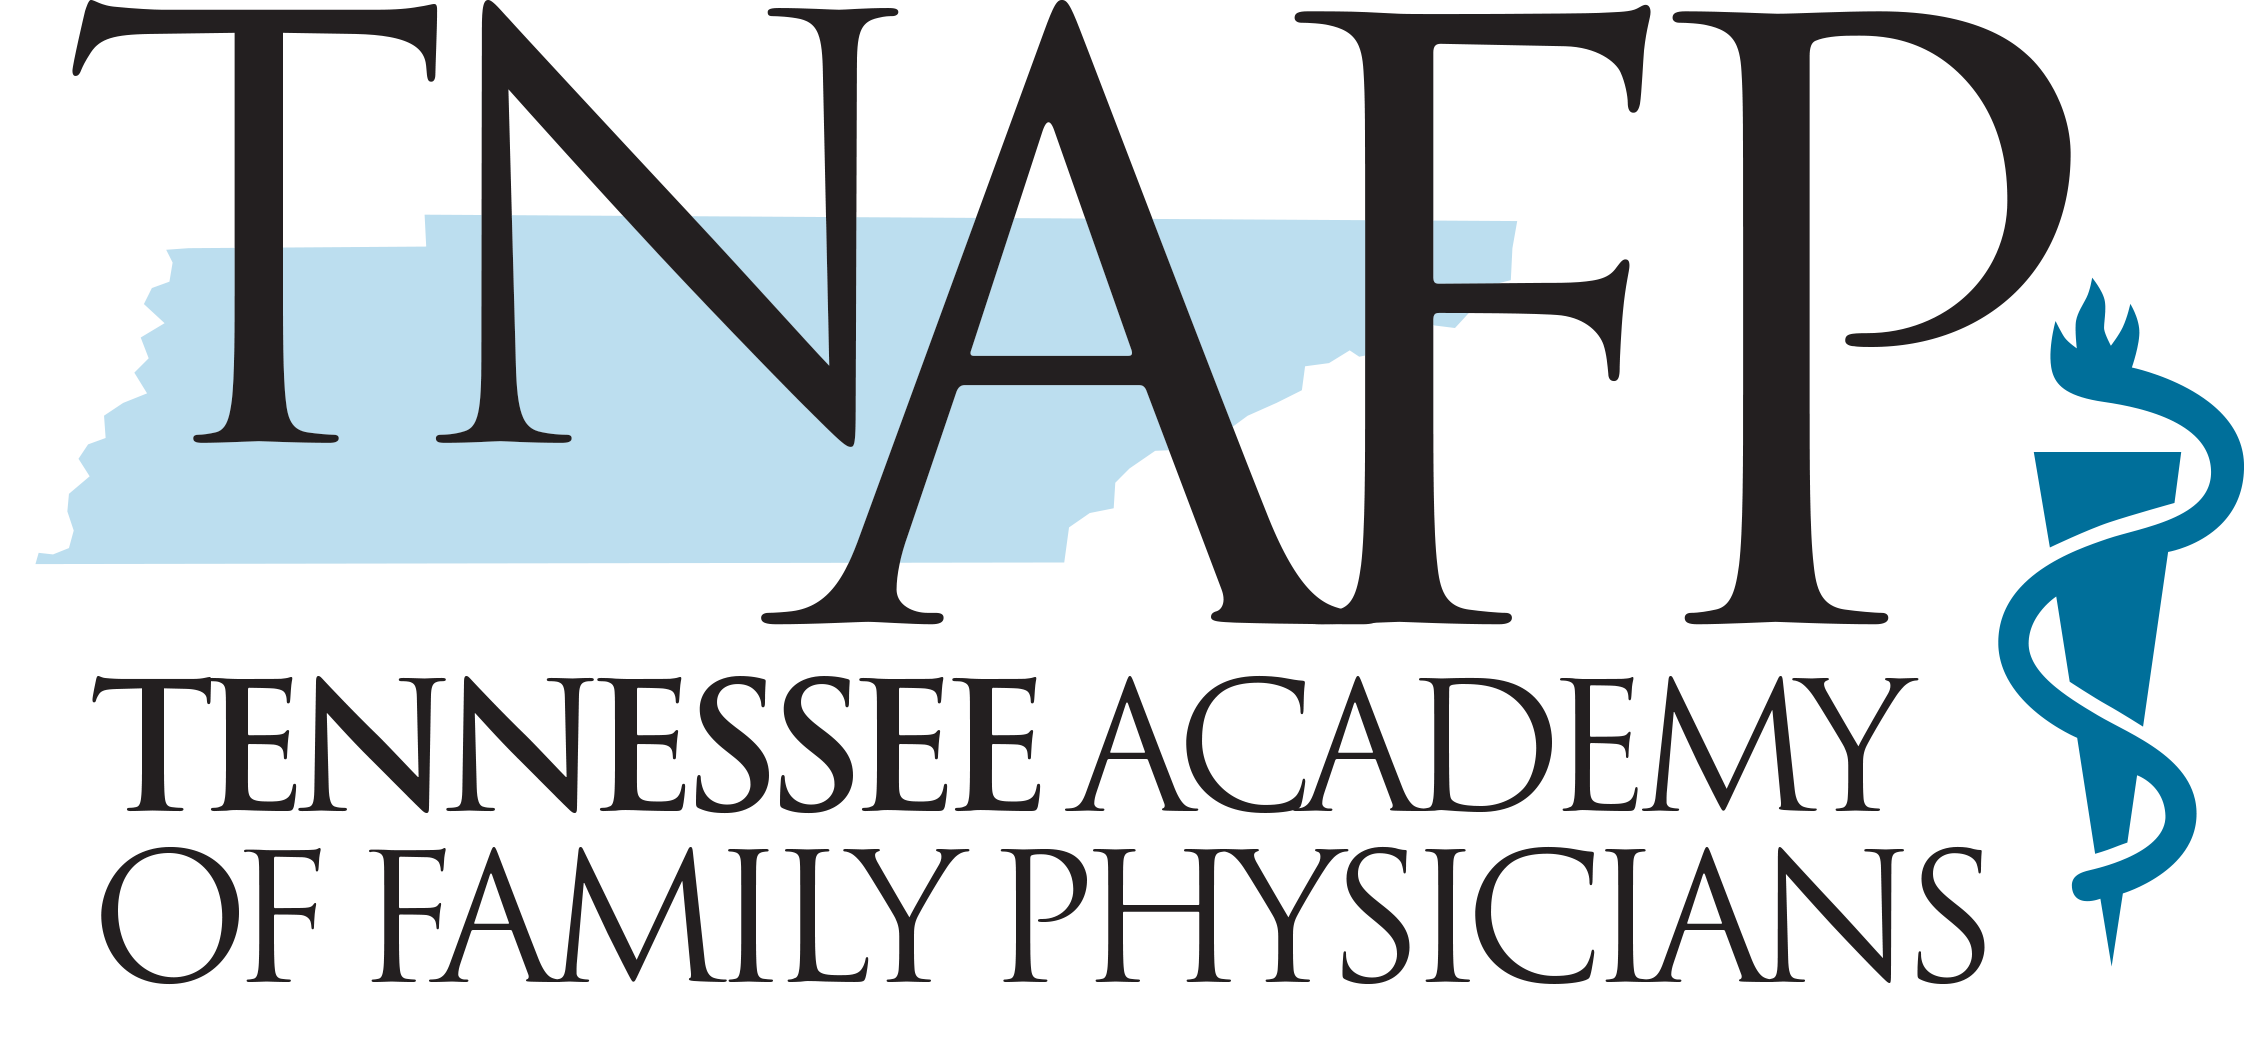 Tennessee Academy of Family Physicians 